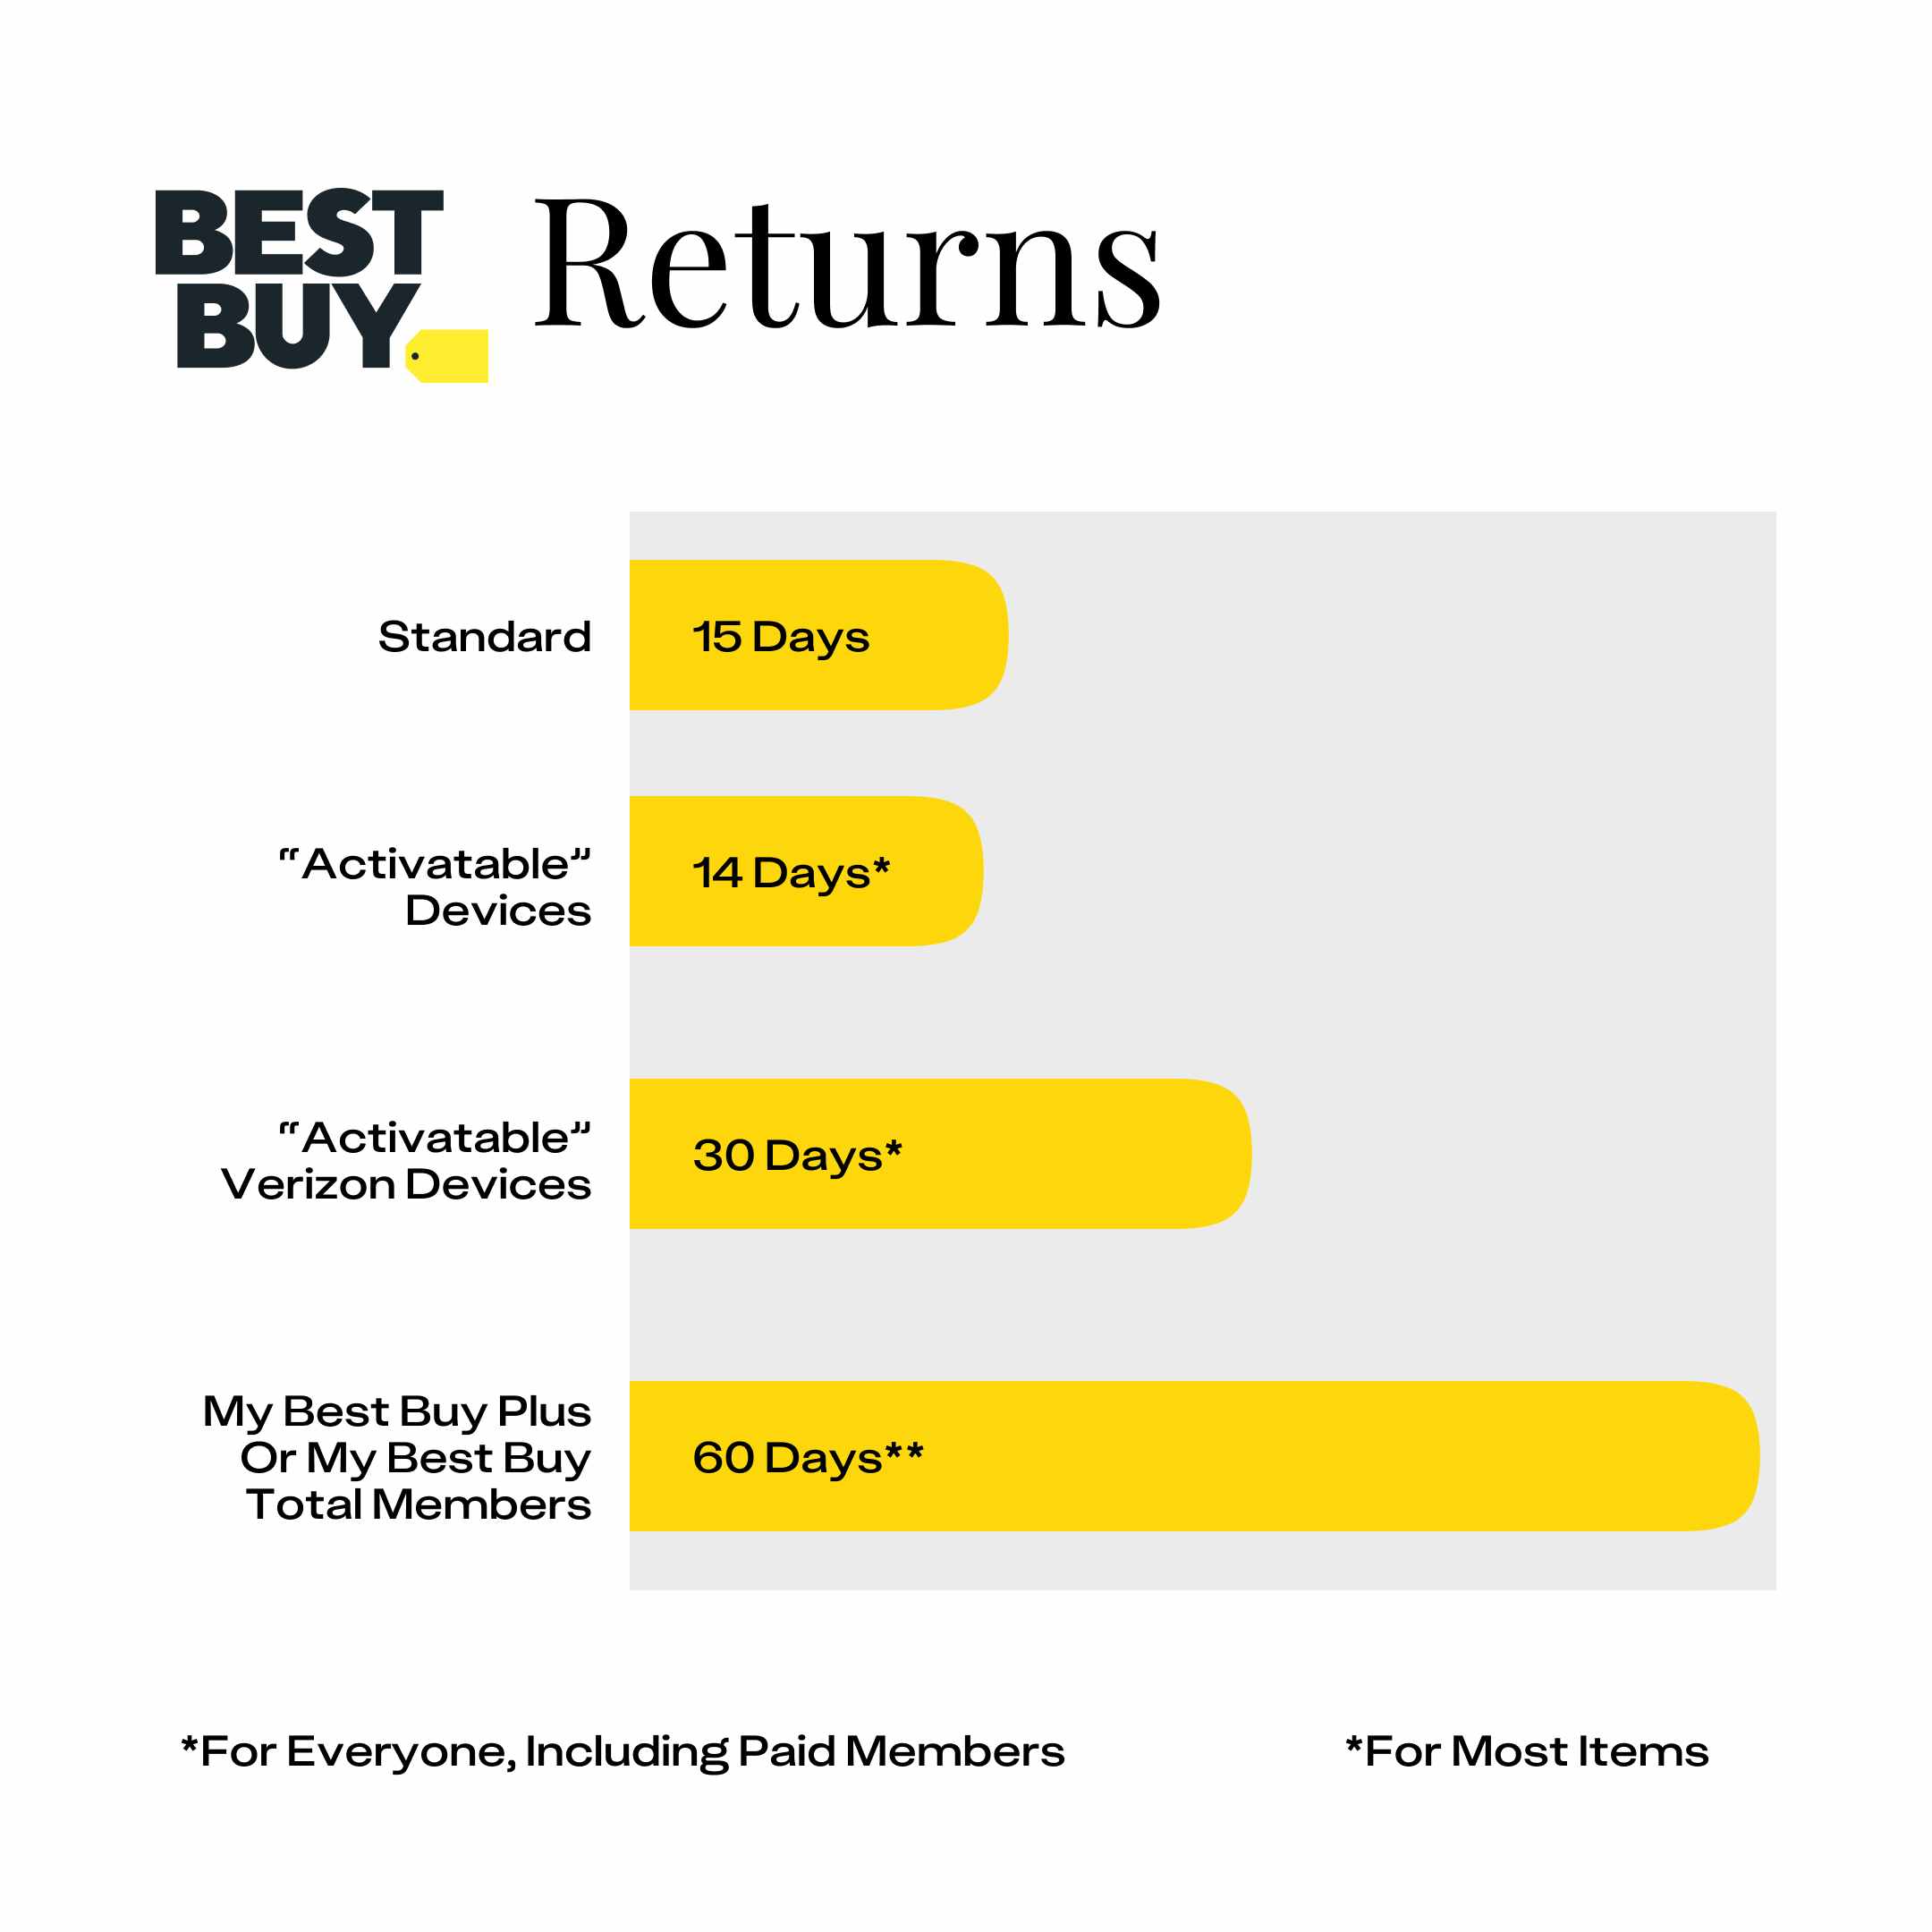 Chart showing the Best Buy Return Policy window, which ranges from 14 to 60 days.